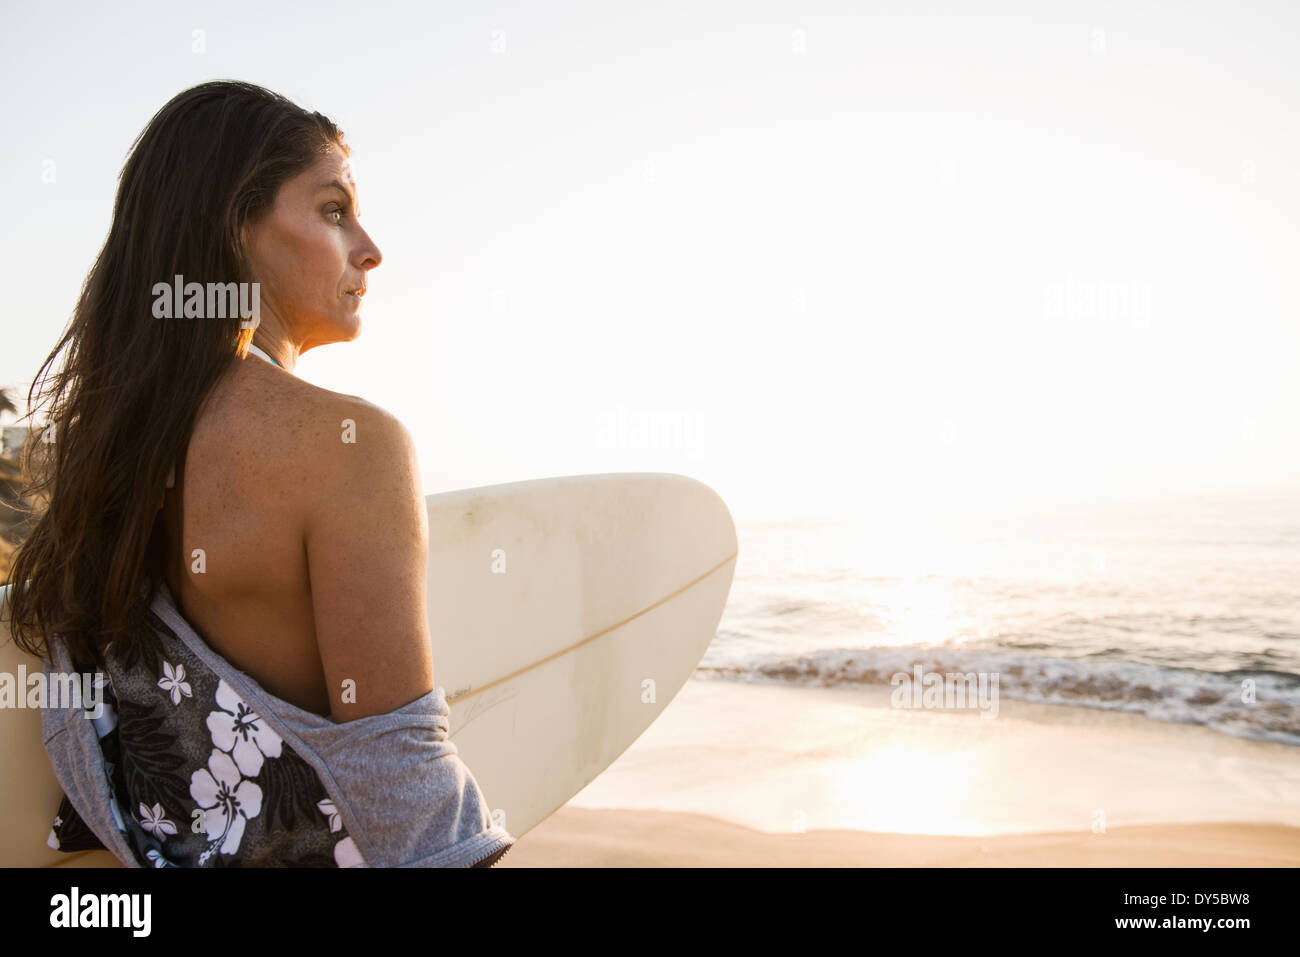 Surfer carrying surf board, looking at sea Stock Photo